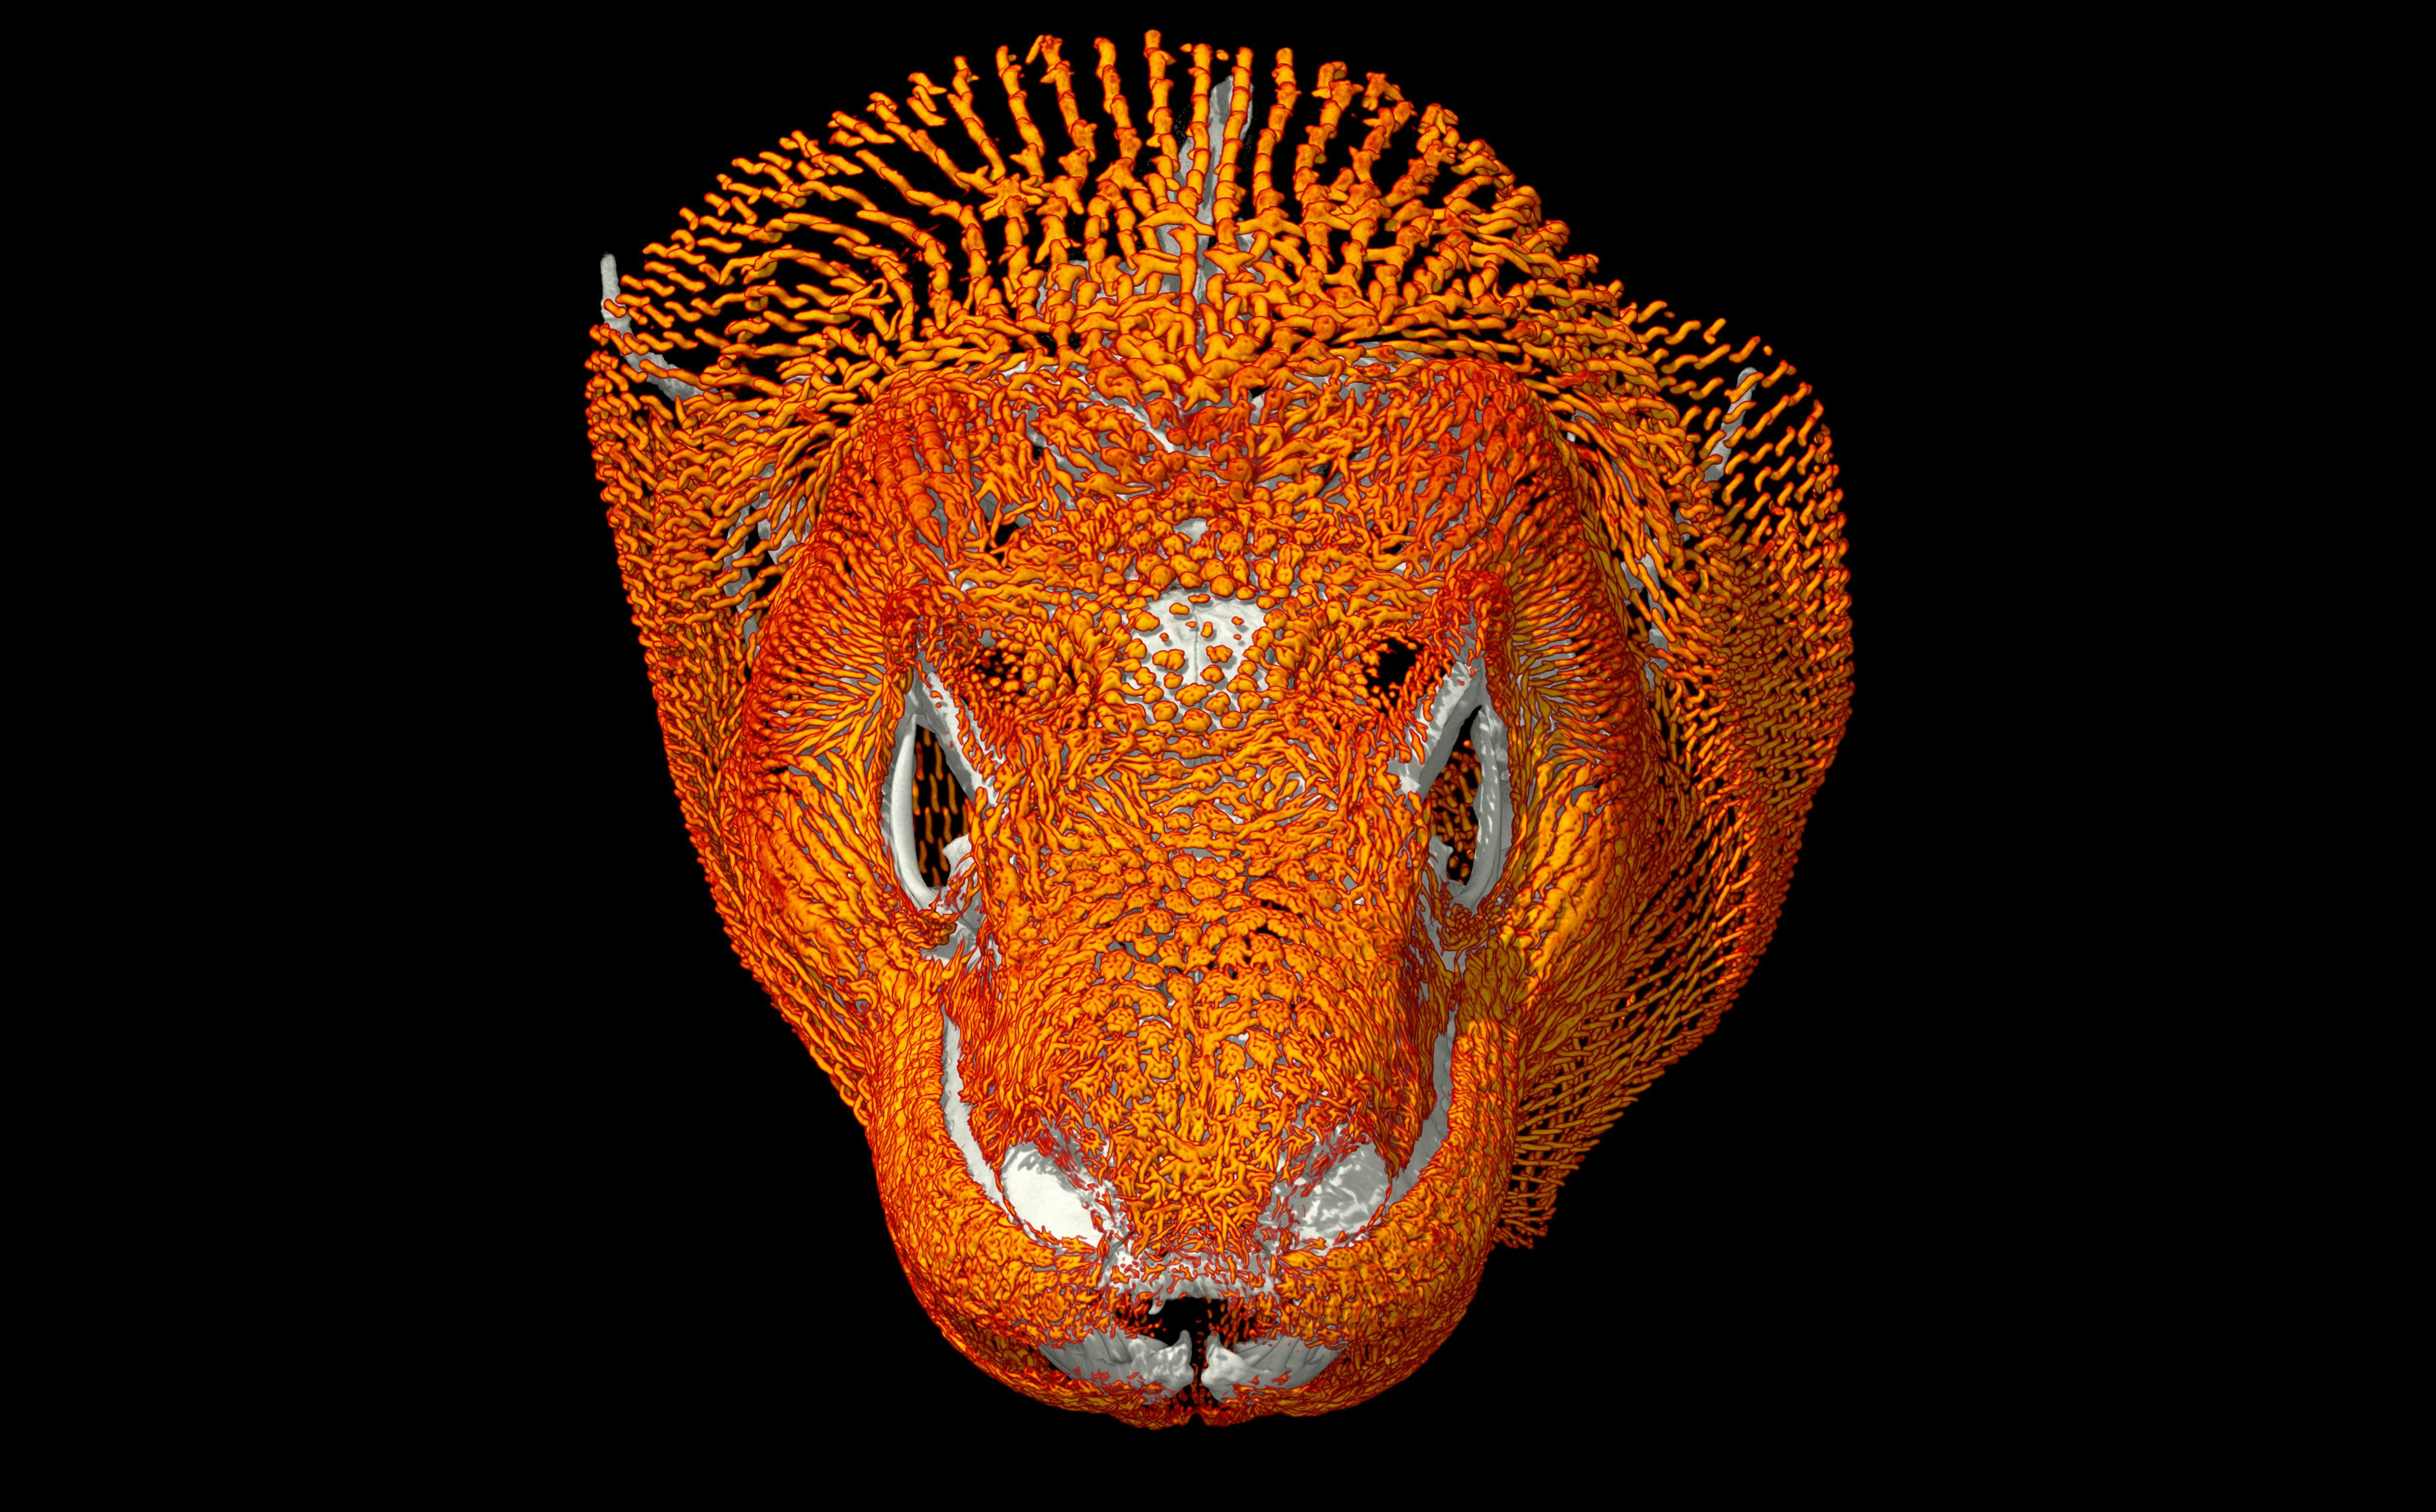 This three-dimensional high-resolution X-ray computed tomography (CT) image differentiates between the bony chainmail (in orange) embedded in the skin of a Komodo Dragon and the underlying bones of its skull (in white). 